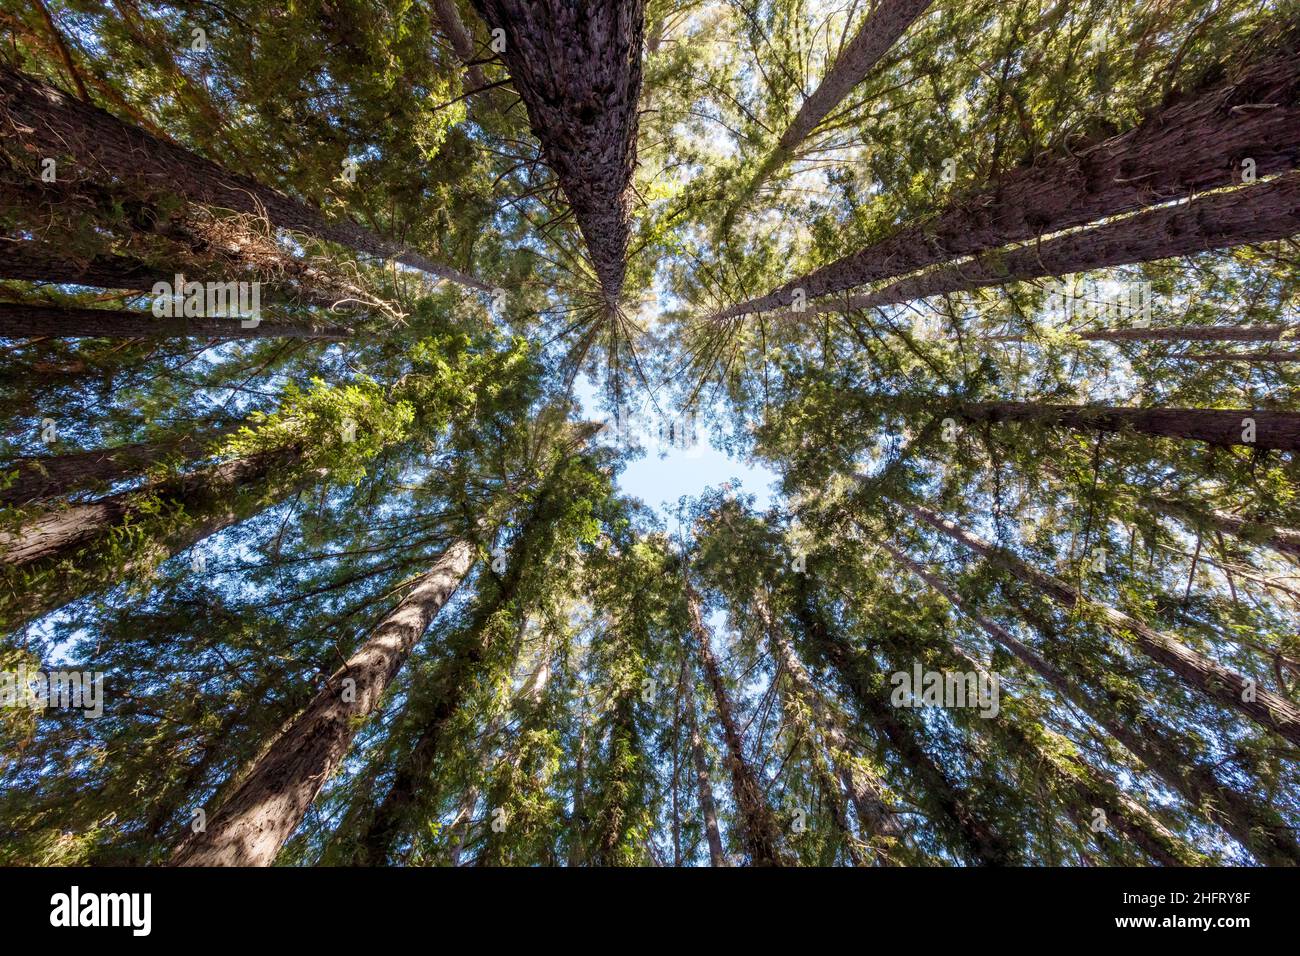 Looking up at redwoods, Mendocino County, Northern California, USA Stock Photo